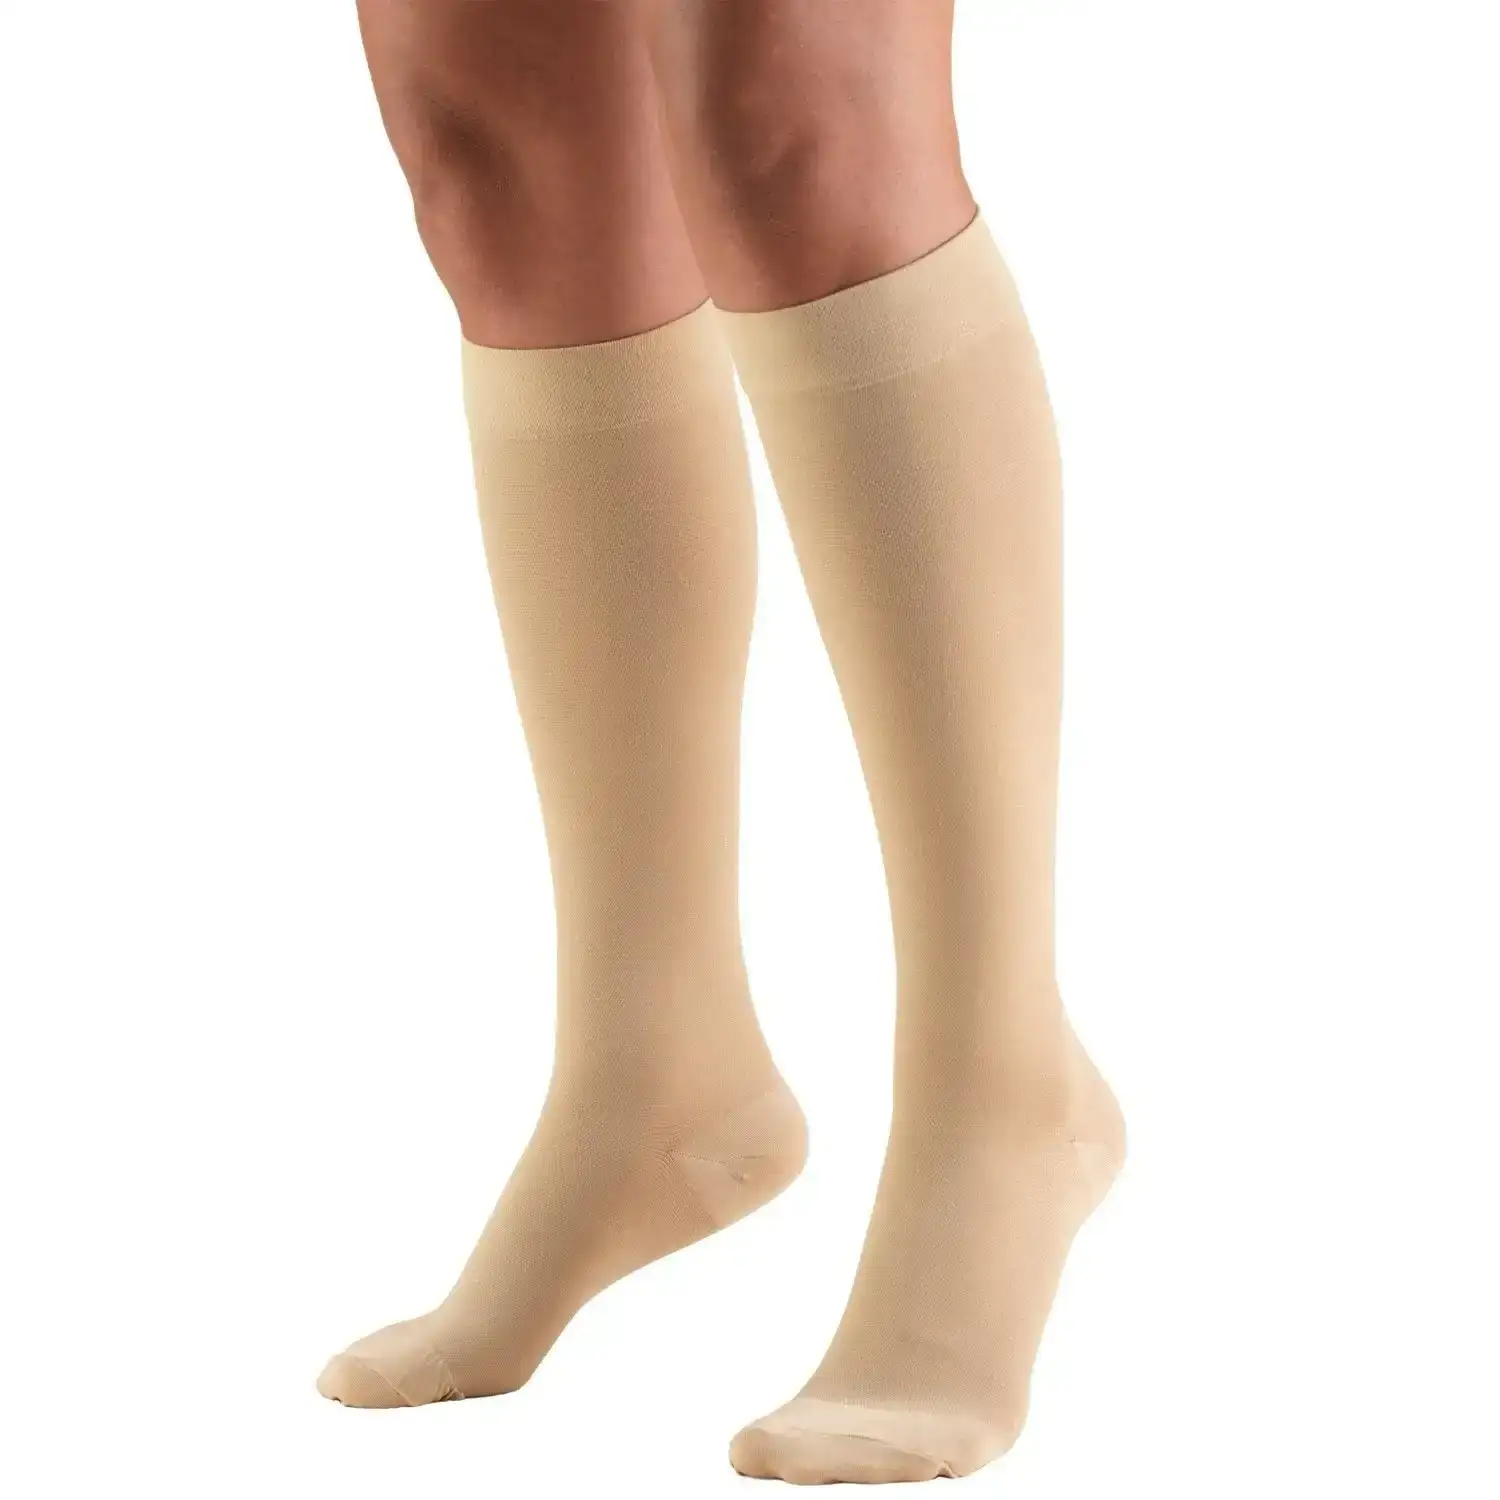 Image of TRUFORM Classic Medical Closed Toe Knee High Support Stockings 20-30 mmHg